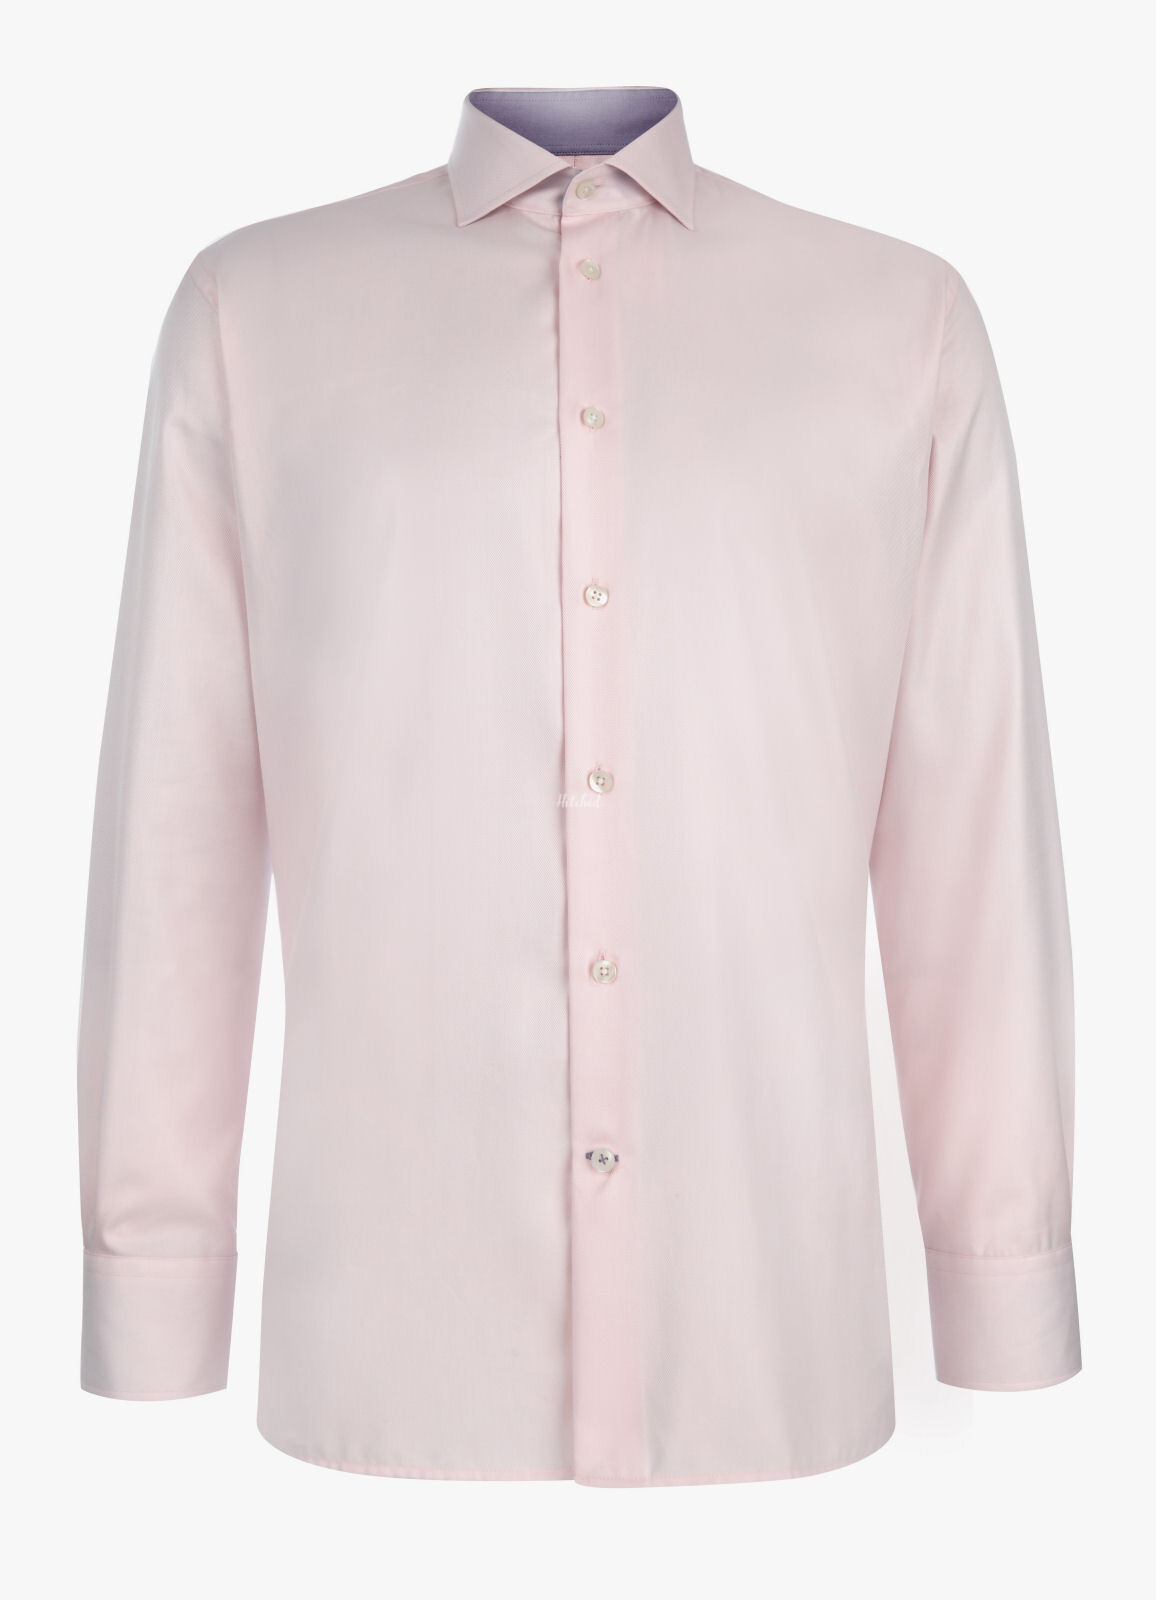 Canfield DC Formal Shirt Light Pink Mens Wedding Suit from Without ...